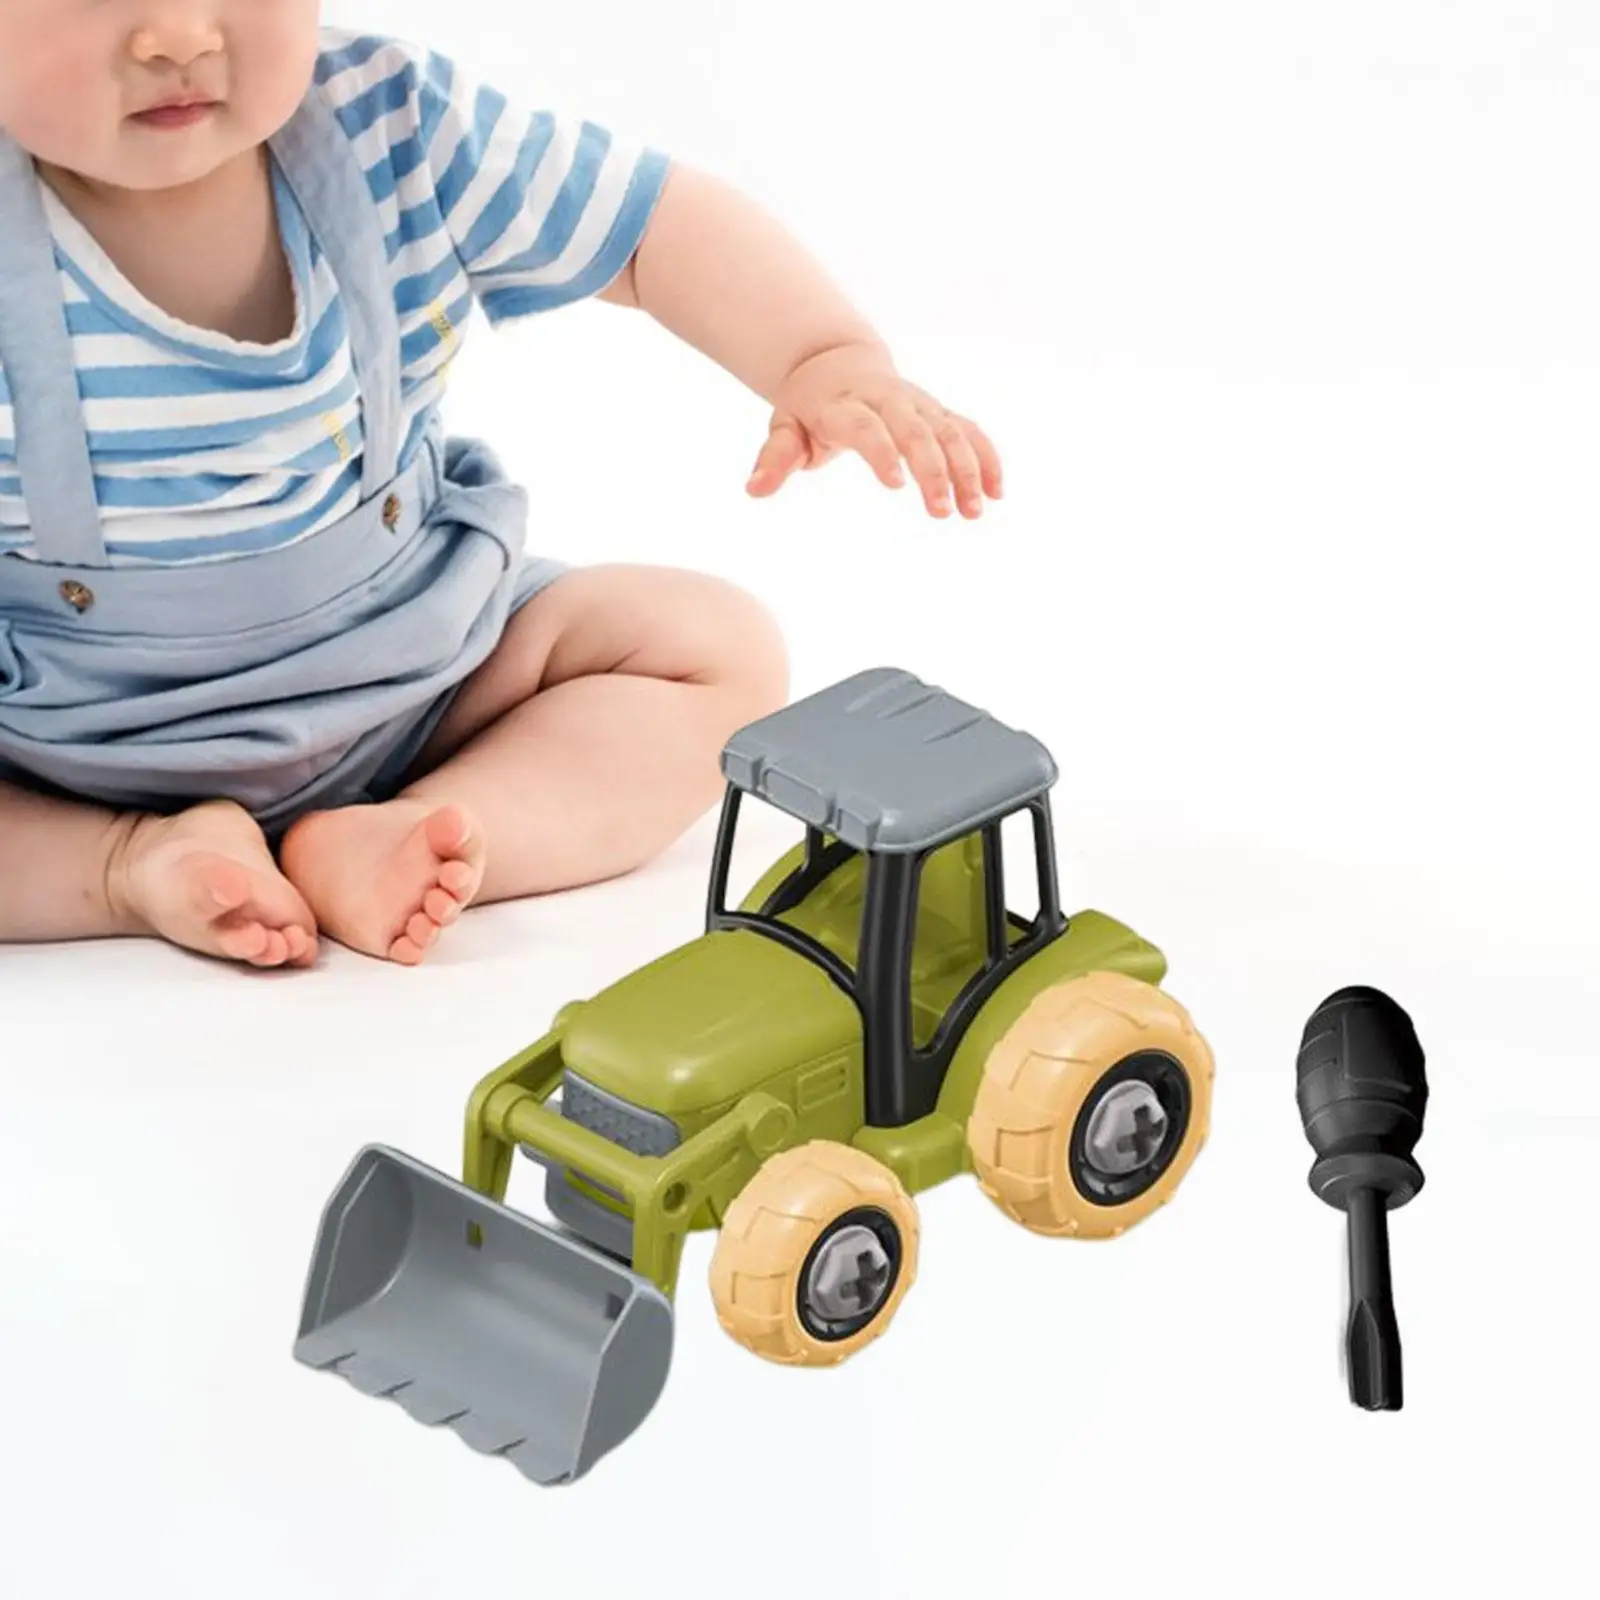 Take Apart Toy Excavator Truck Hands on Ability DIY Assemble Toys W/ Screwdriver for Preschool 3 4 5 6 7 Year Old Birthday Gifts